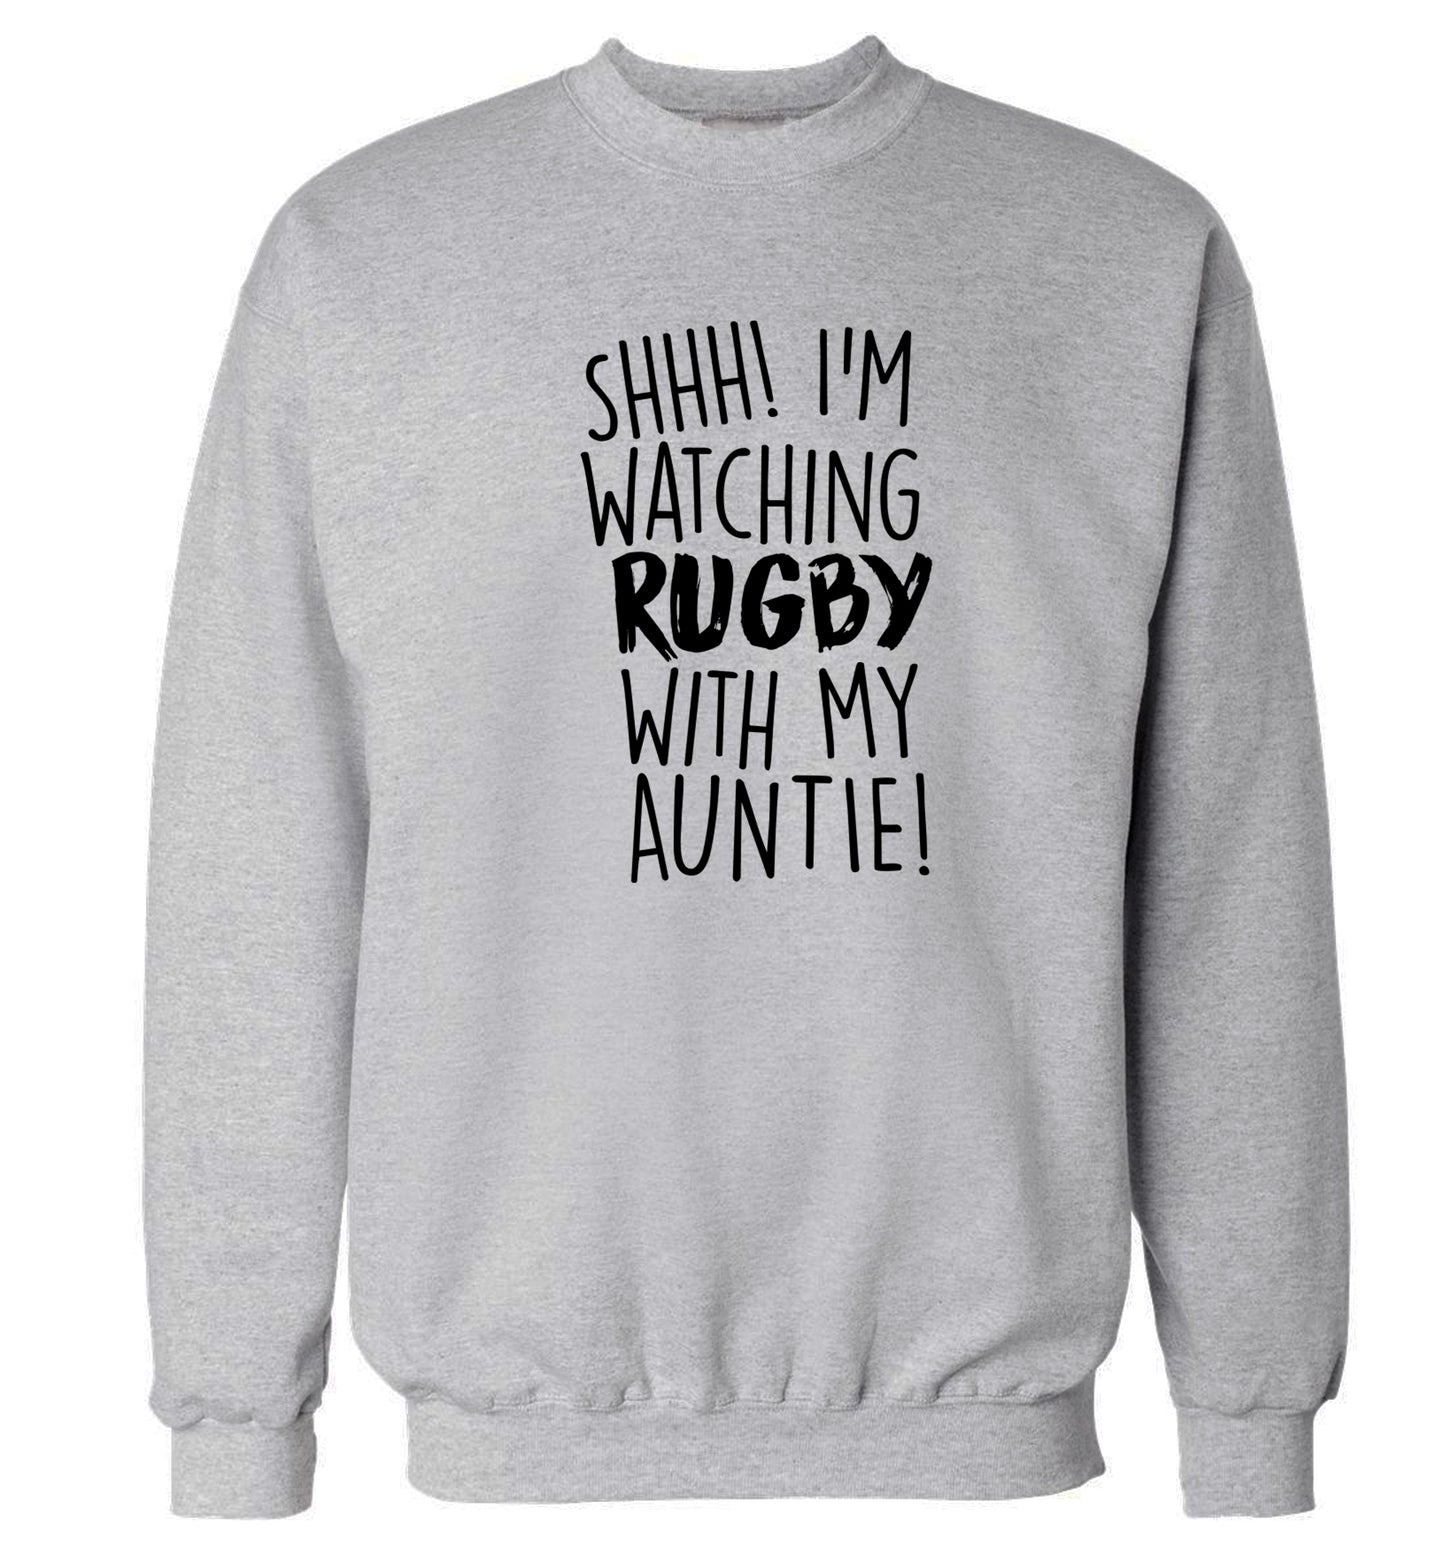 Shhh I'm watchin rugby with my auntie Adult's unisex grey Sweater 2XL